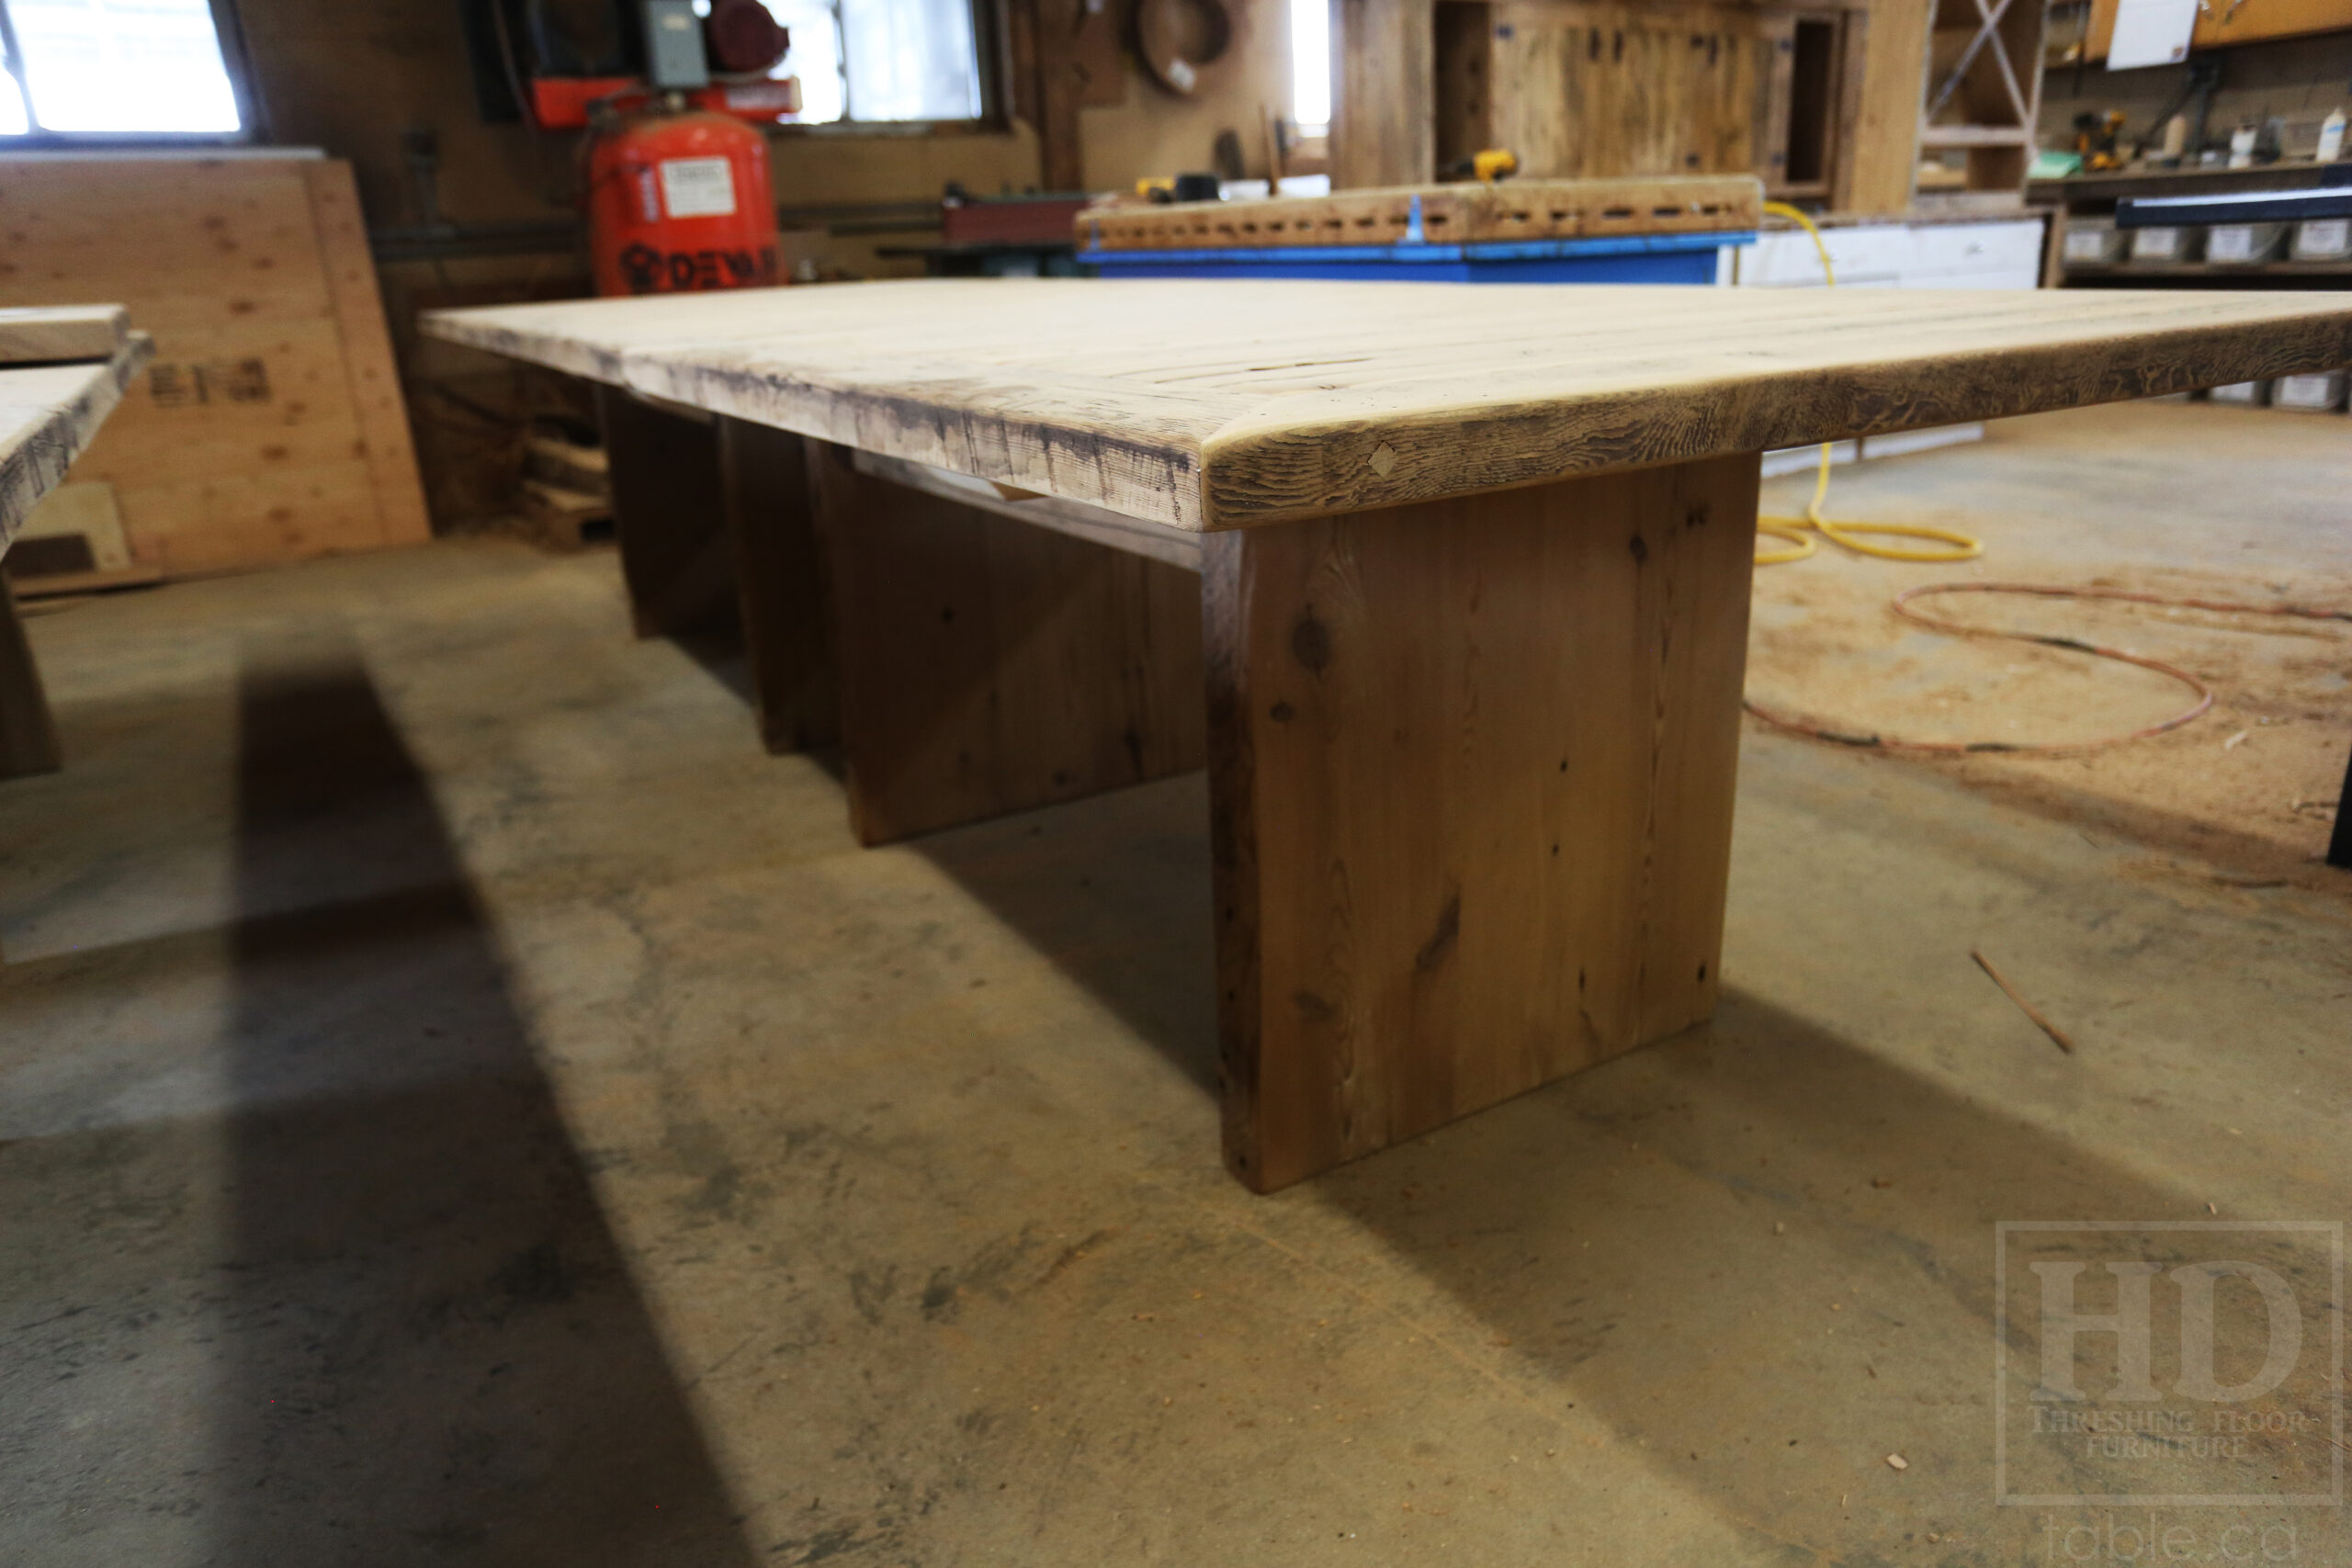 Project Summary: [TWO] 12â€™ Reclaimed Barnwood Tables we made for a Kitchener, Ontario organization â€“ 48â€ wide â€“ Plank 3â€ Joist Material Bases â€“ 2 Underside rails to hide electronics - Old Growth Hemlock Threshing Floor  Construction - Original edges & distressing maintained â€“ Bread Edge Boards â€“ Premium epoxy + satin polyurethane finish â€“ Grommet holes cut -  www.table.ca